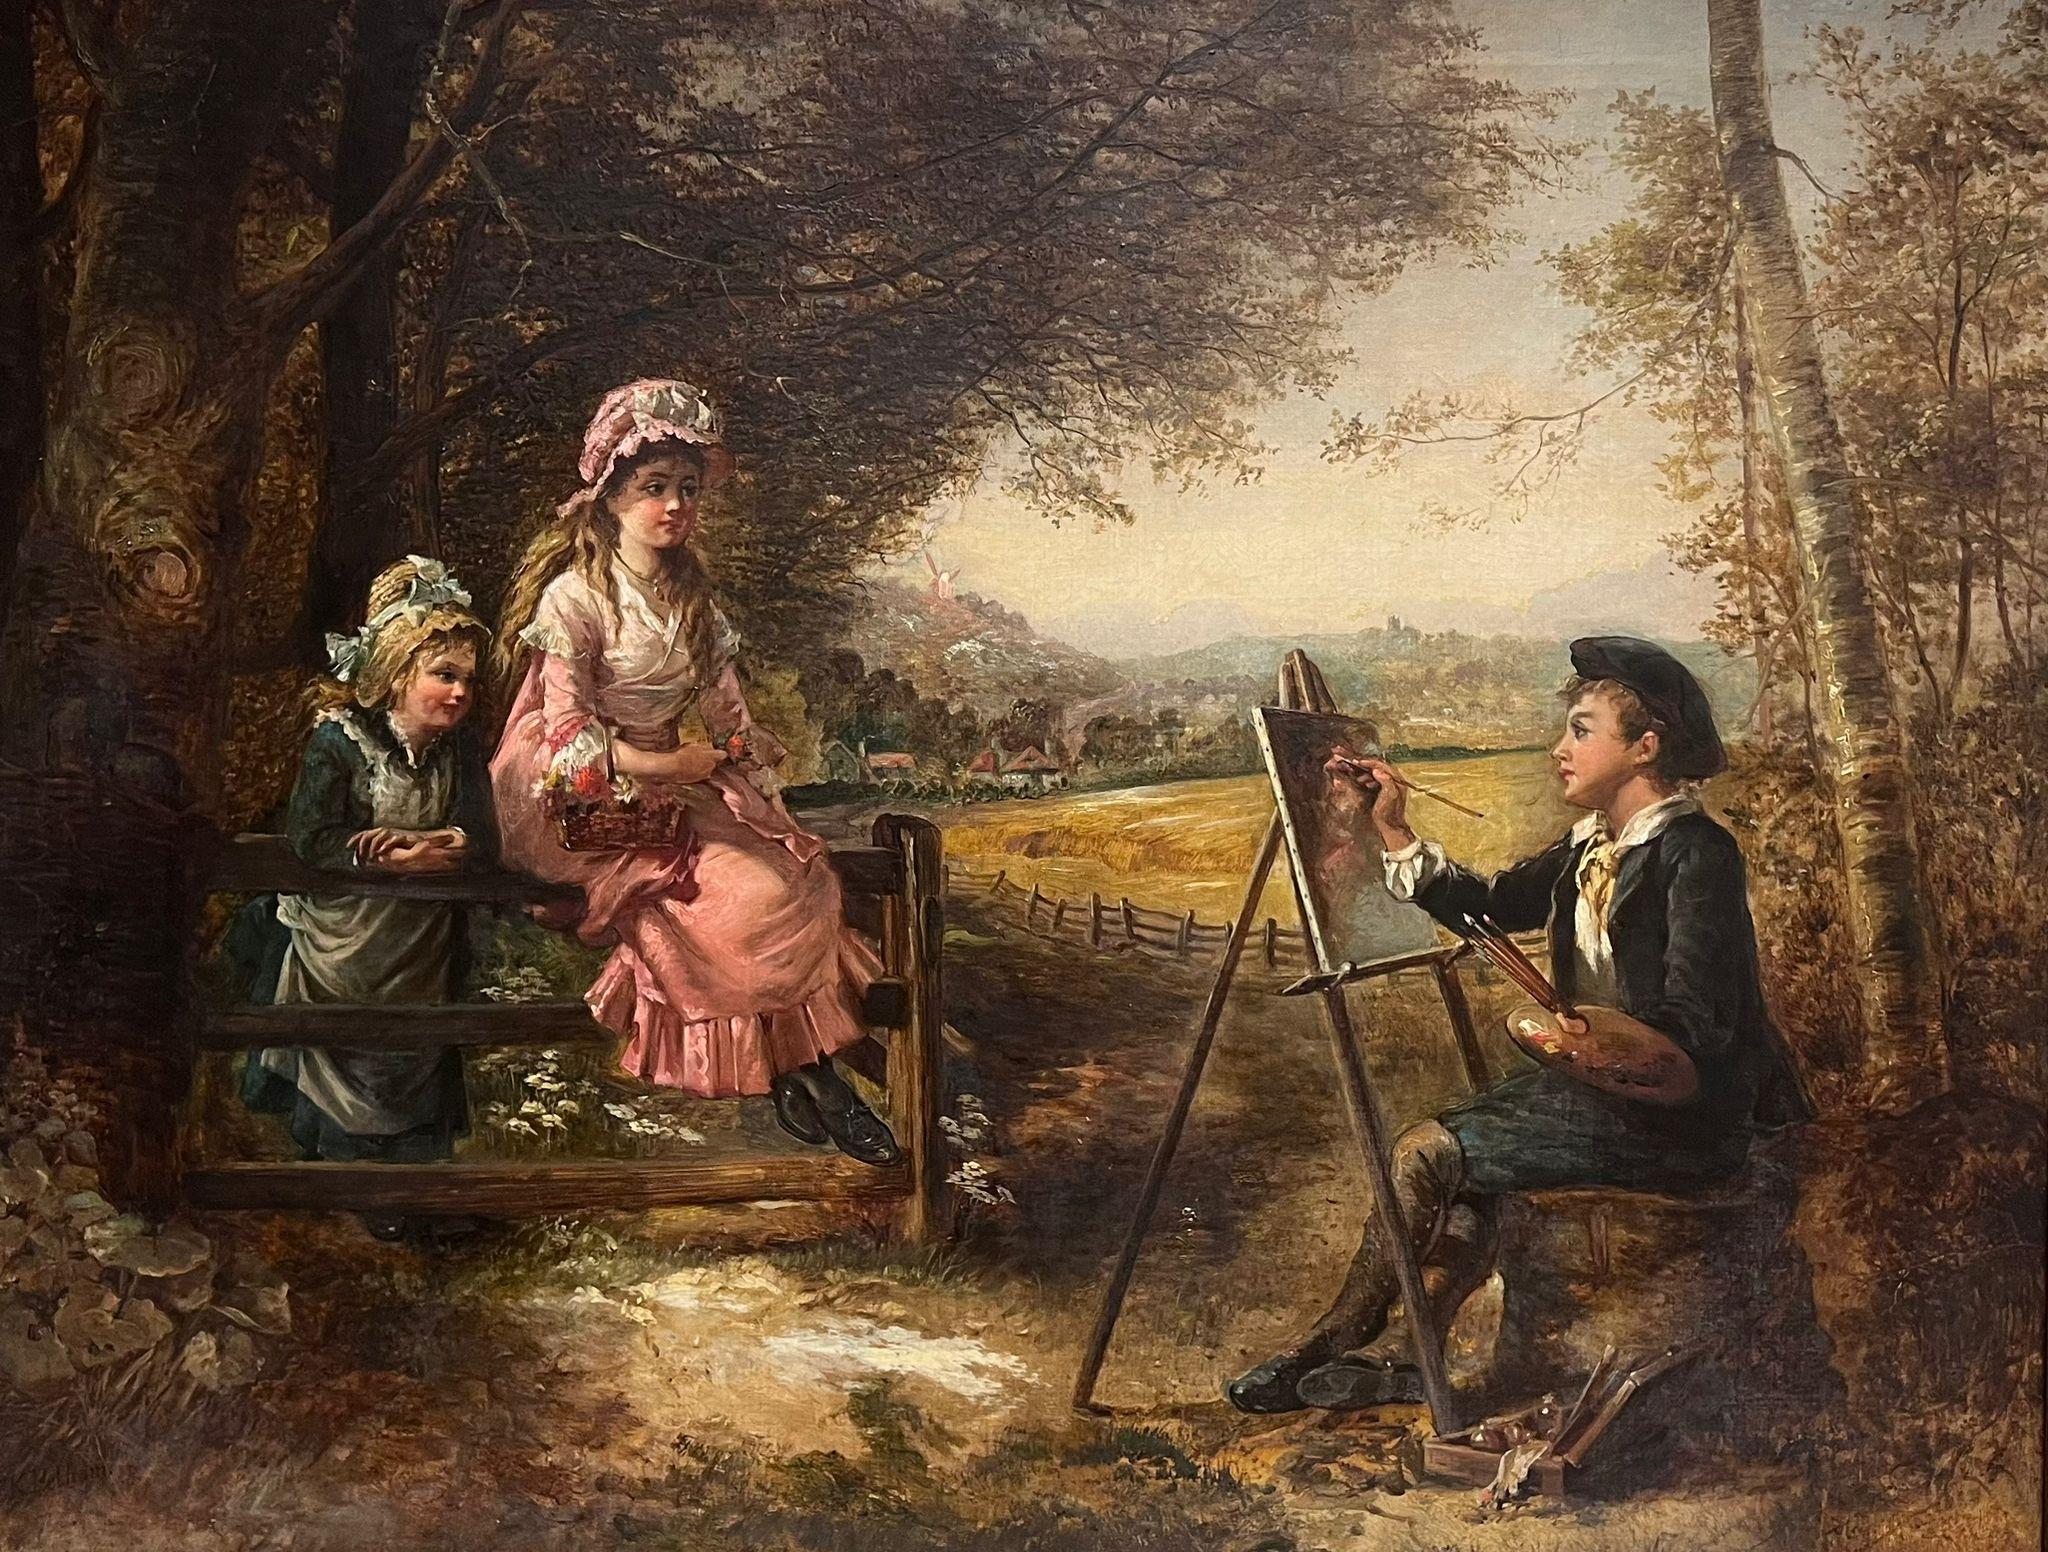 The Young Artist
by Thomas Kent Pelham (act.1860-1891, British)
signed oil on canvas, framed in a beautifully ornate gilt swept frame
framed: 34 x 42 inches
painting: 28 x 36 inches
provenance: private collection, England
condition: very good and